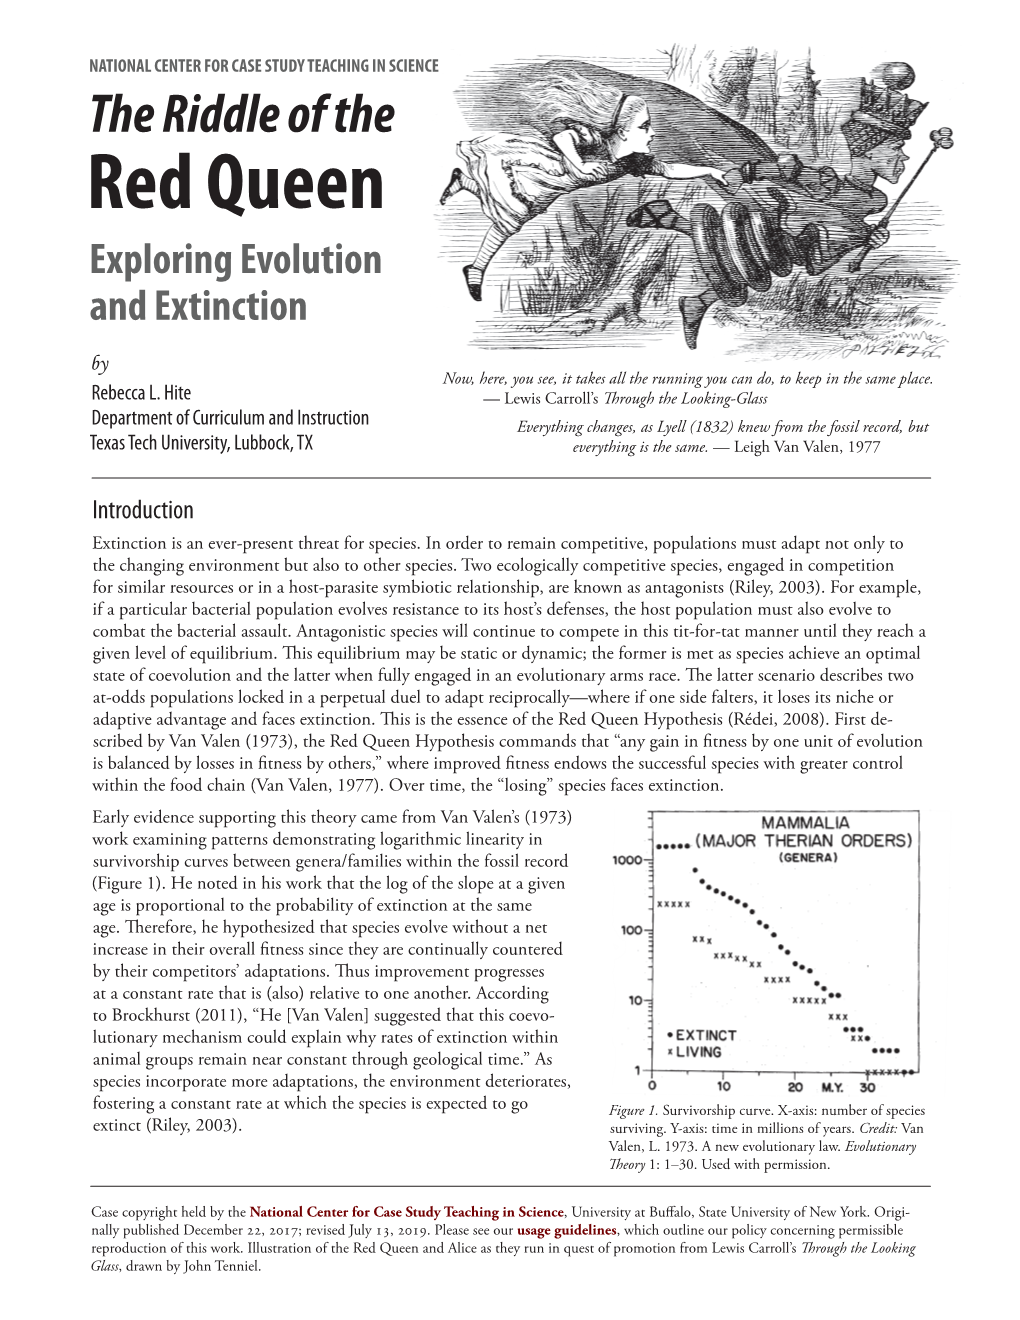 The Riddle of the Red Queen: Exploring Evolution and Extinction